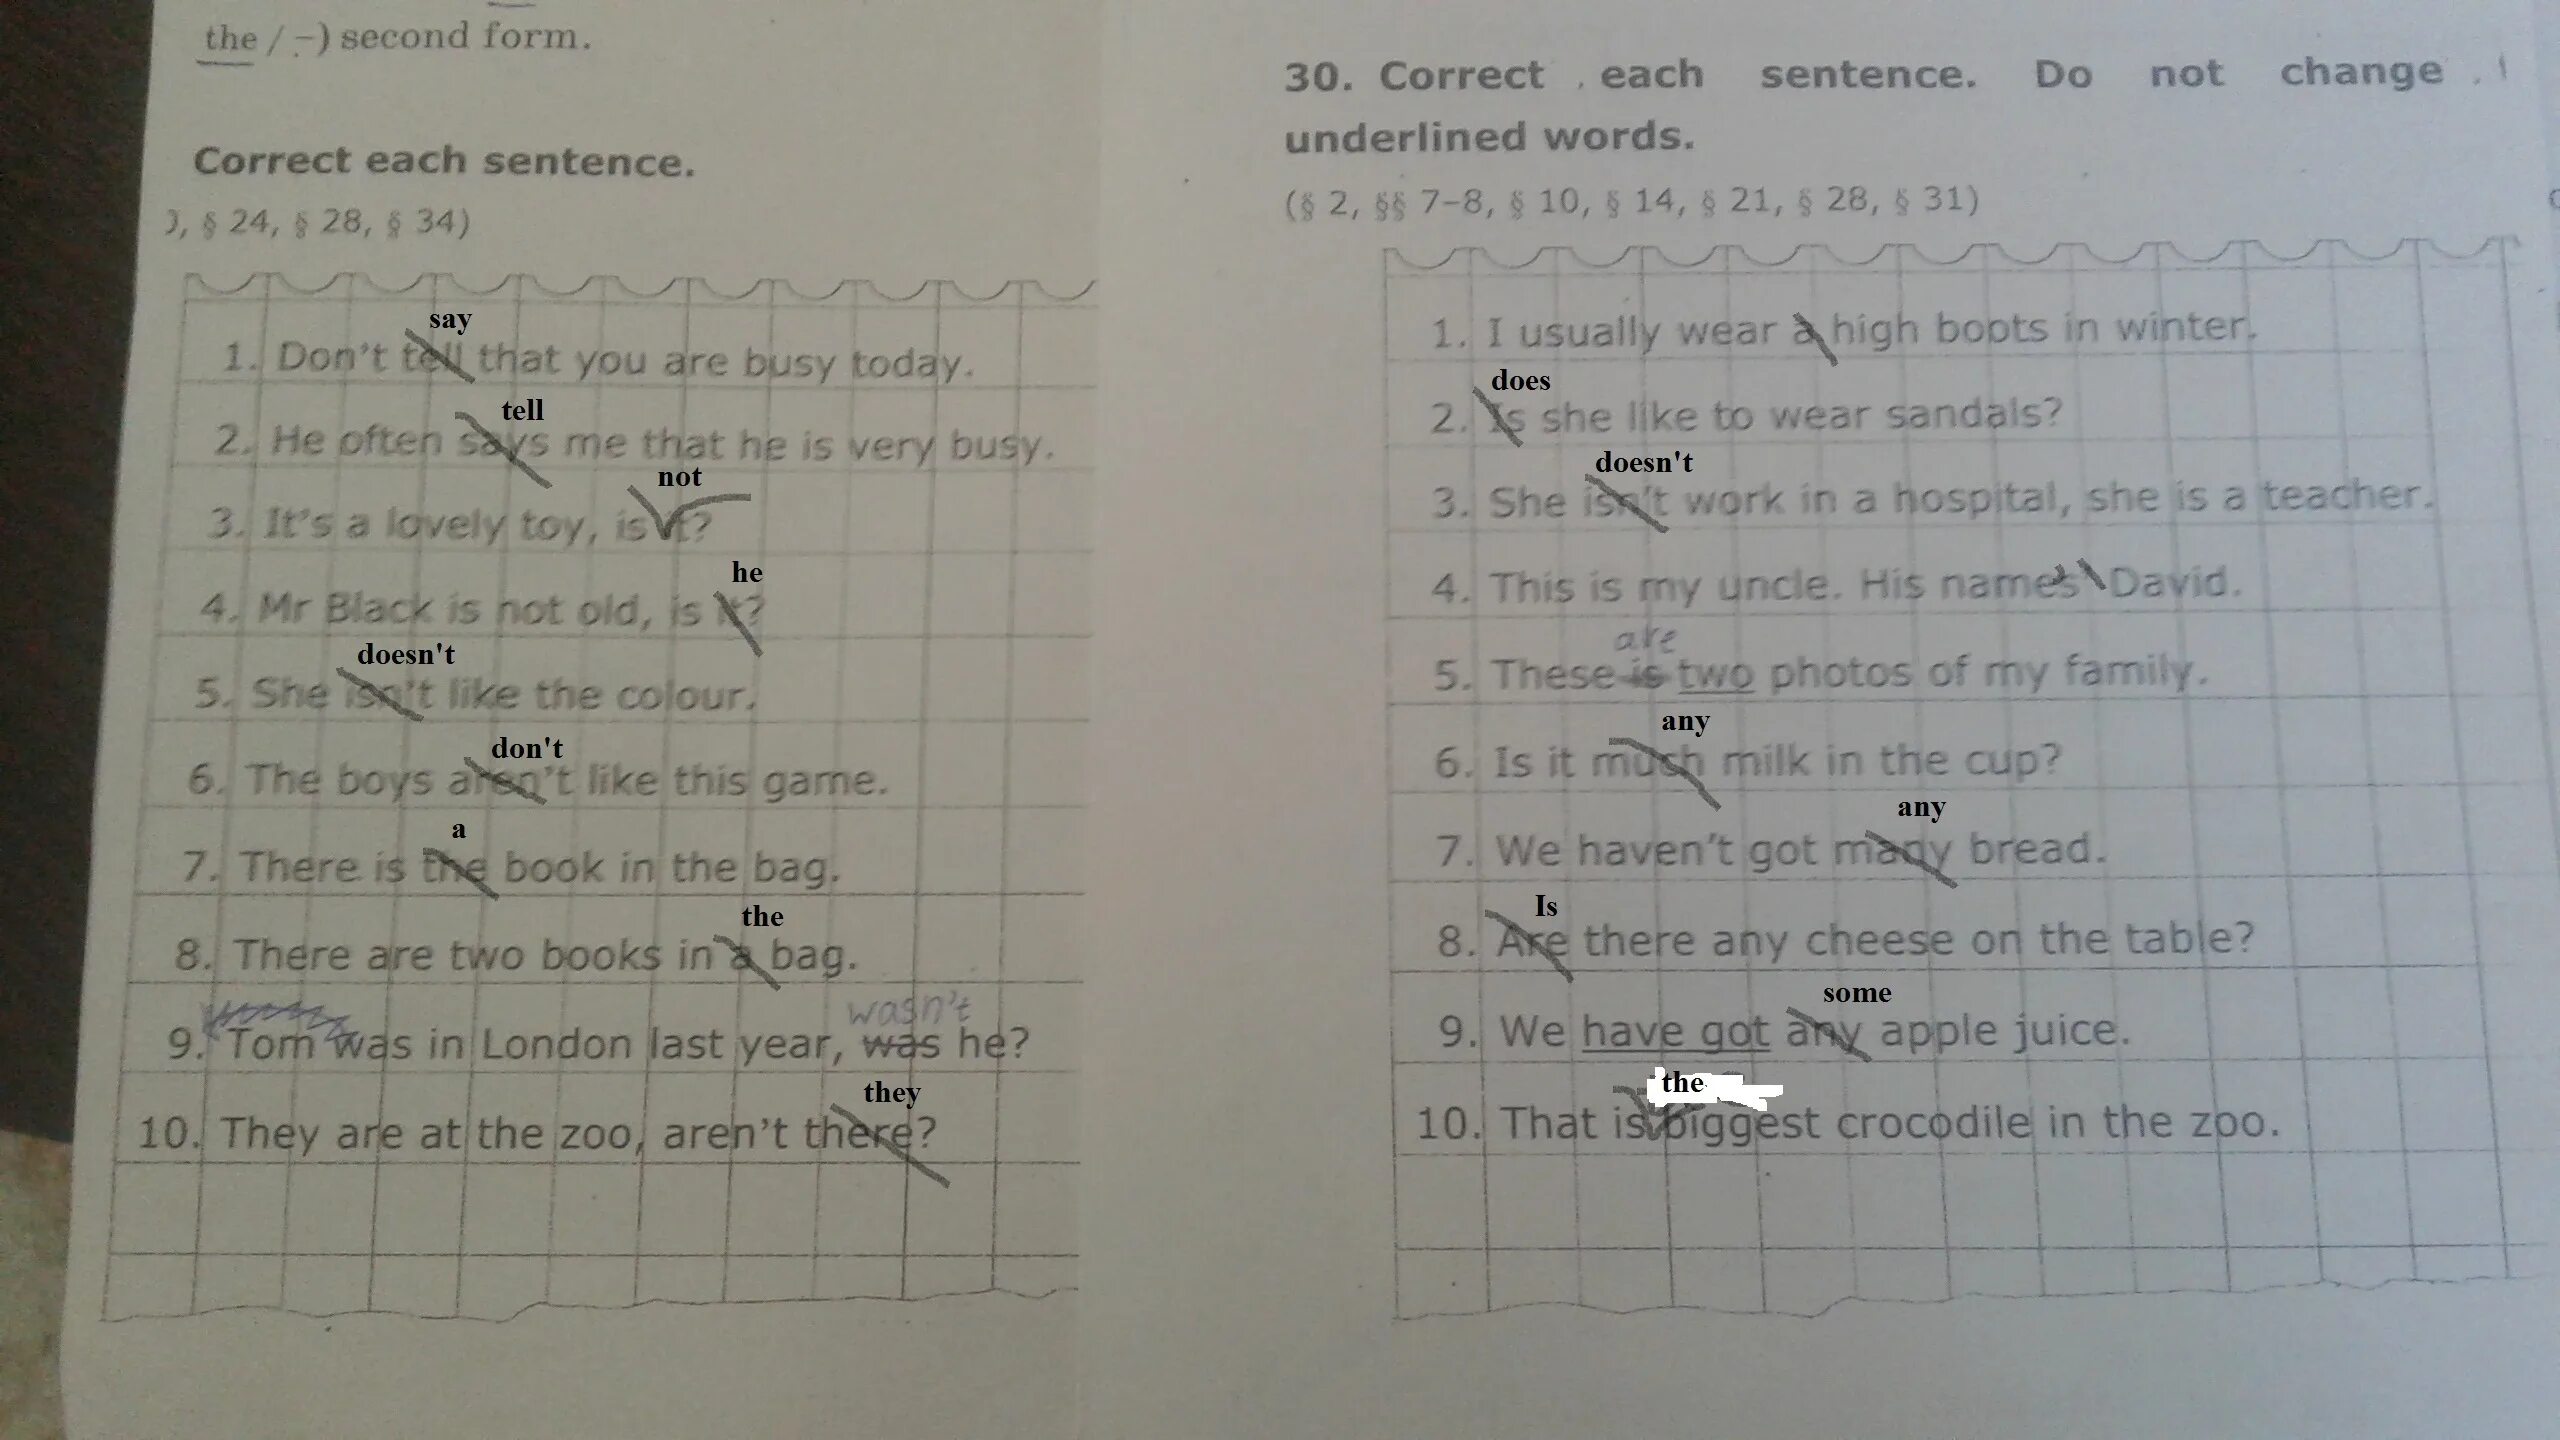 Correct each sentence перевод. Correct each sentence do not change the underlined Words. Correct each sentence do not change the underlined Words i Wonder where are they. 150. Correct each sentence. Do not change the underlined Words. ($$ 12-13, $ 36, § 40, § 42)Your Dog never Plays, doesn't it?. At the end of each sentence